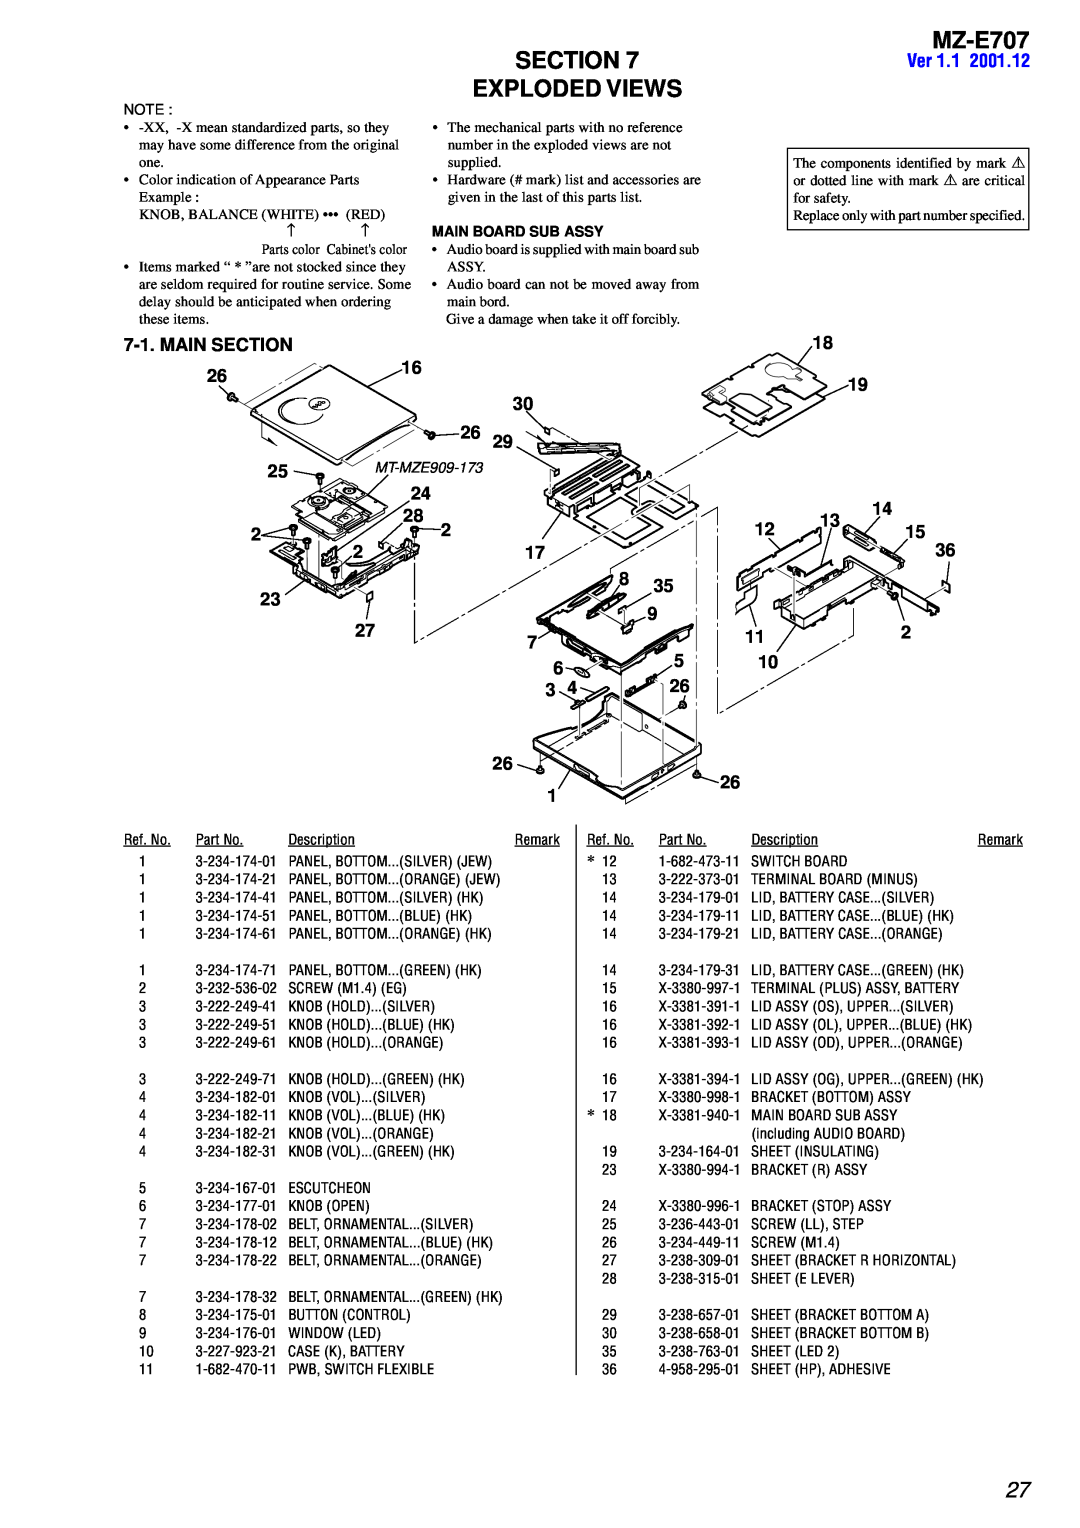 Sony MZ-E707 service manual Section Exploded Views, Ver 